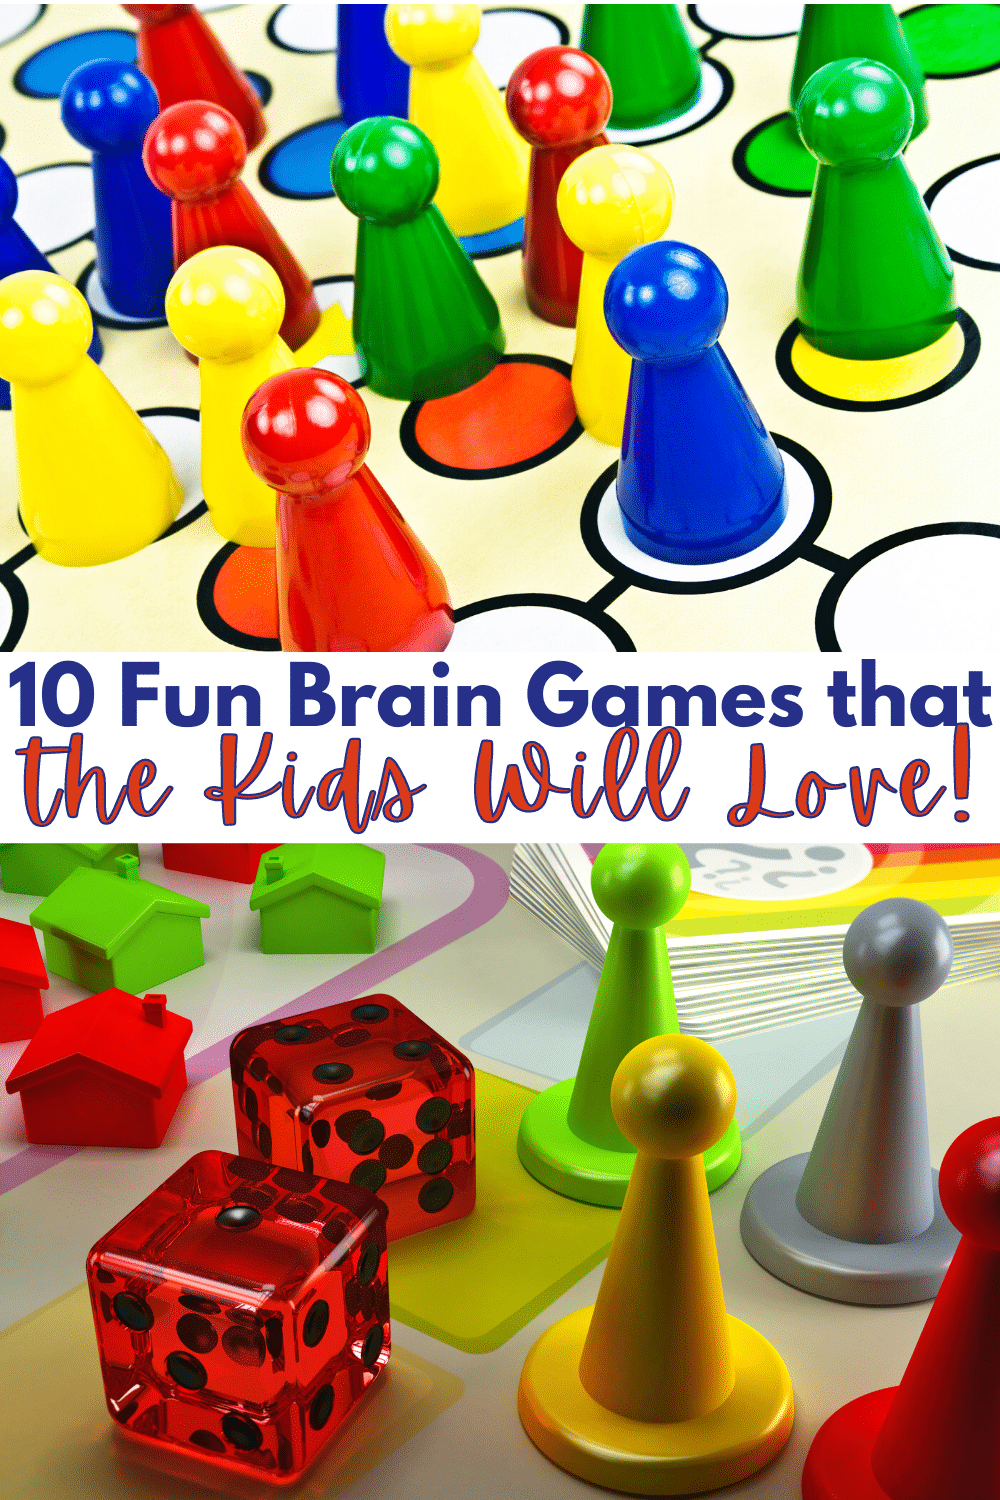 These brain games for kids are fun, interactive ways to stimulate thinking skills. These are great tools for making learning fun! #games #braingames #forkids via @wondermomwannab